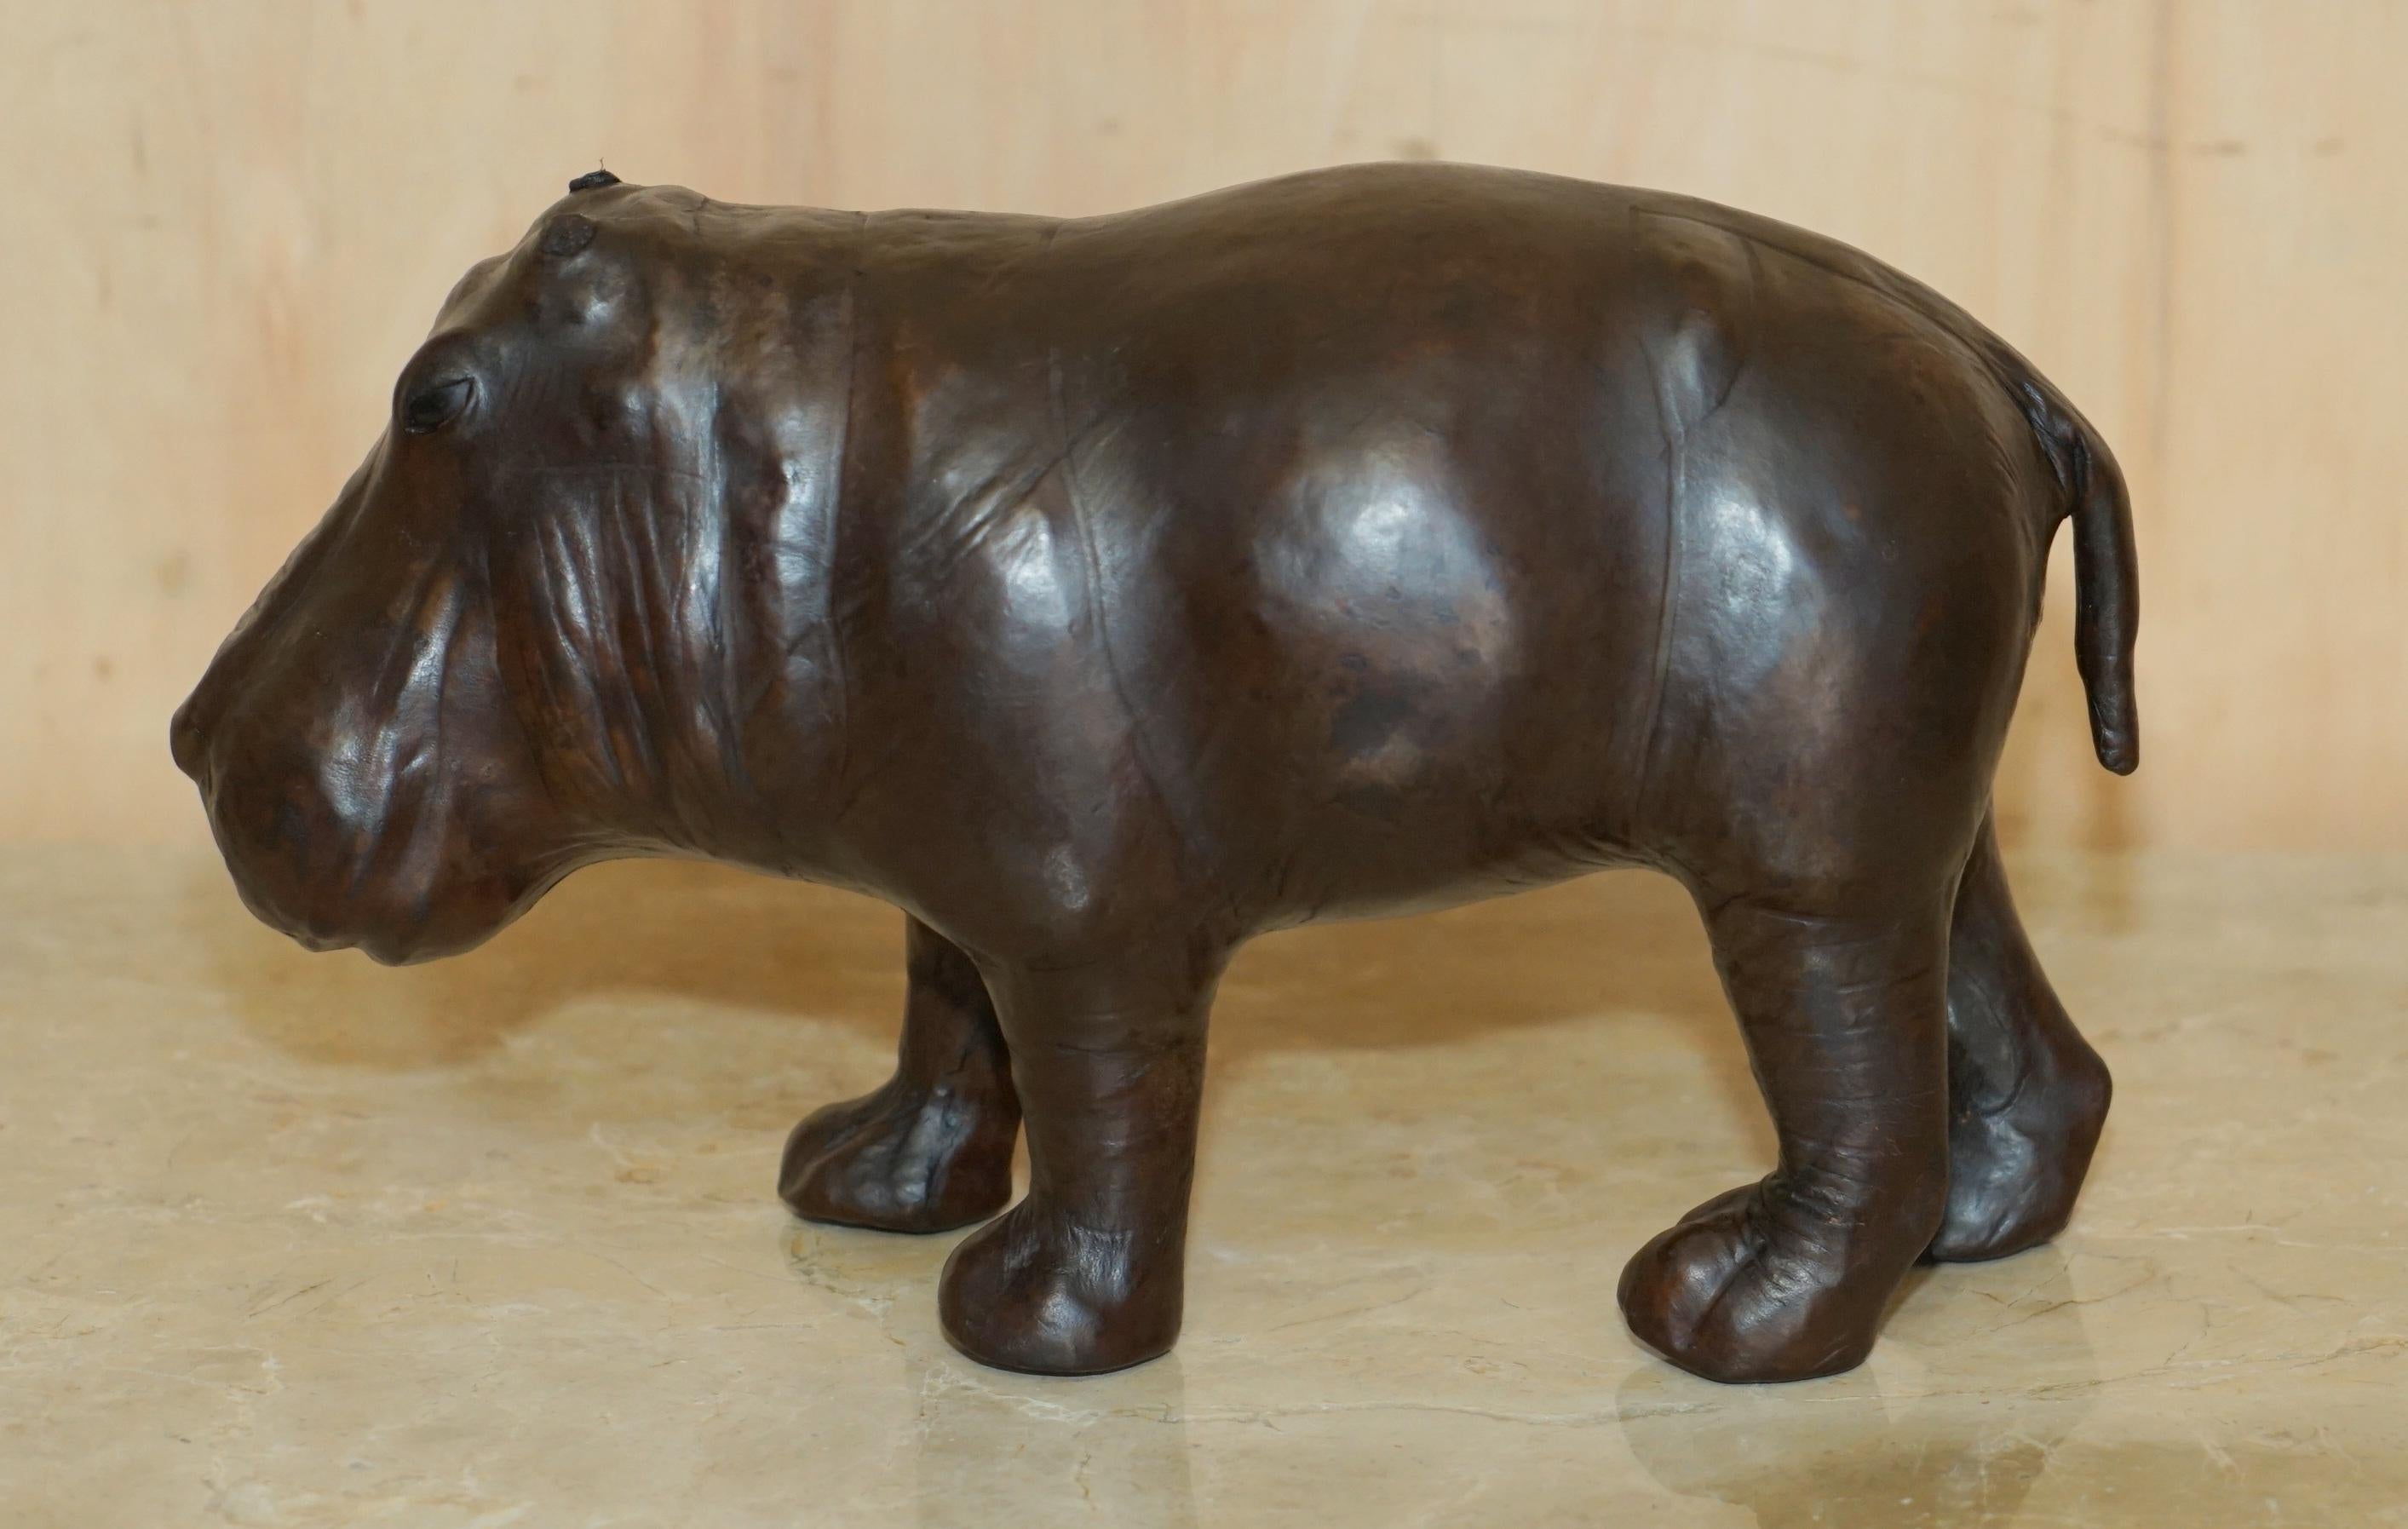 Royal House Antiques

Royal House Antiques is delighted to offer for sale this absolutely sublime very rare and original, small sized 1930’s Liberty’s London Omersa brown leather hand dyed Hippo stool or footstool with original glass eyes

I have a